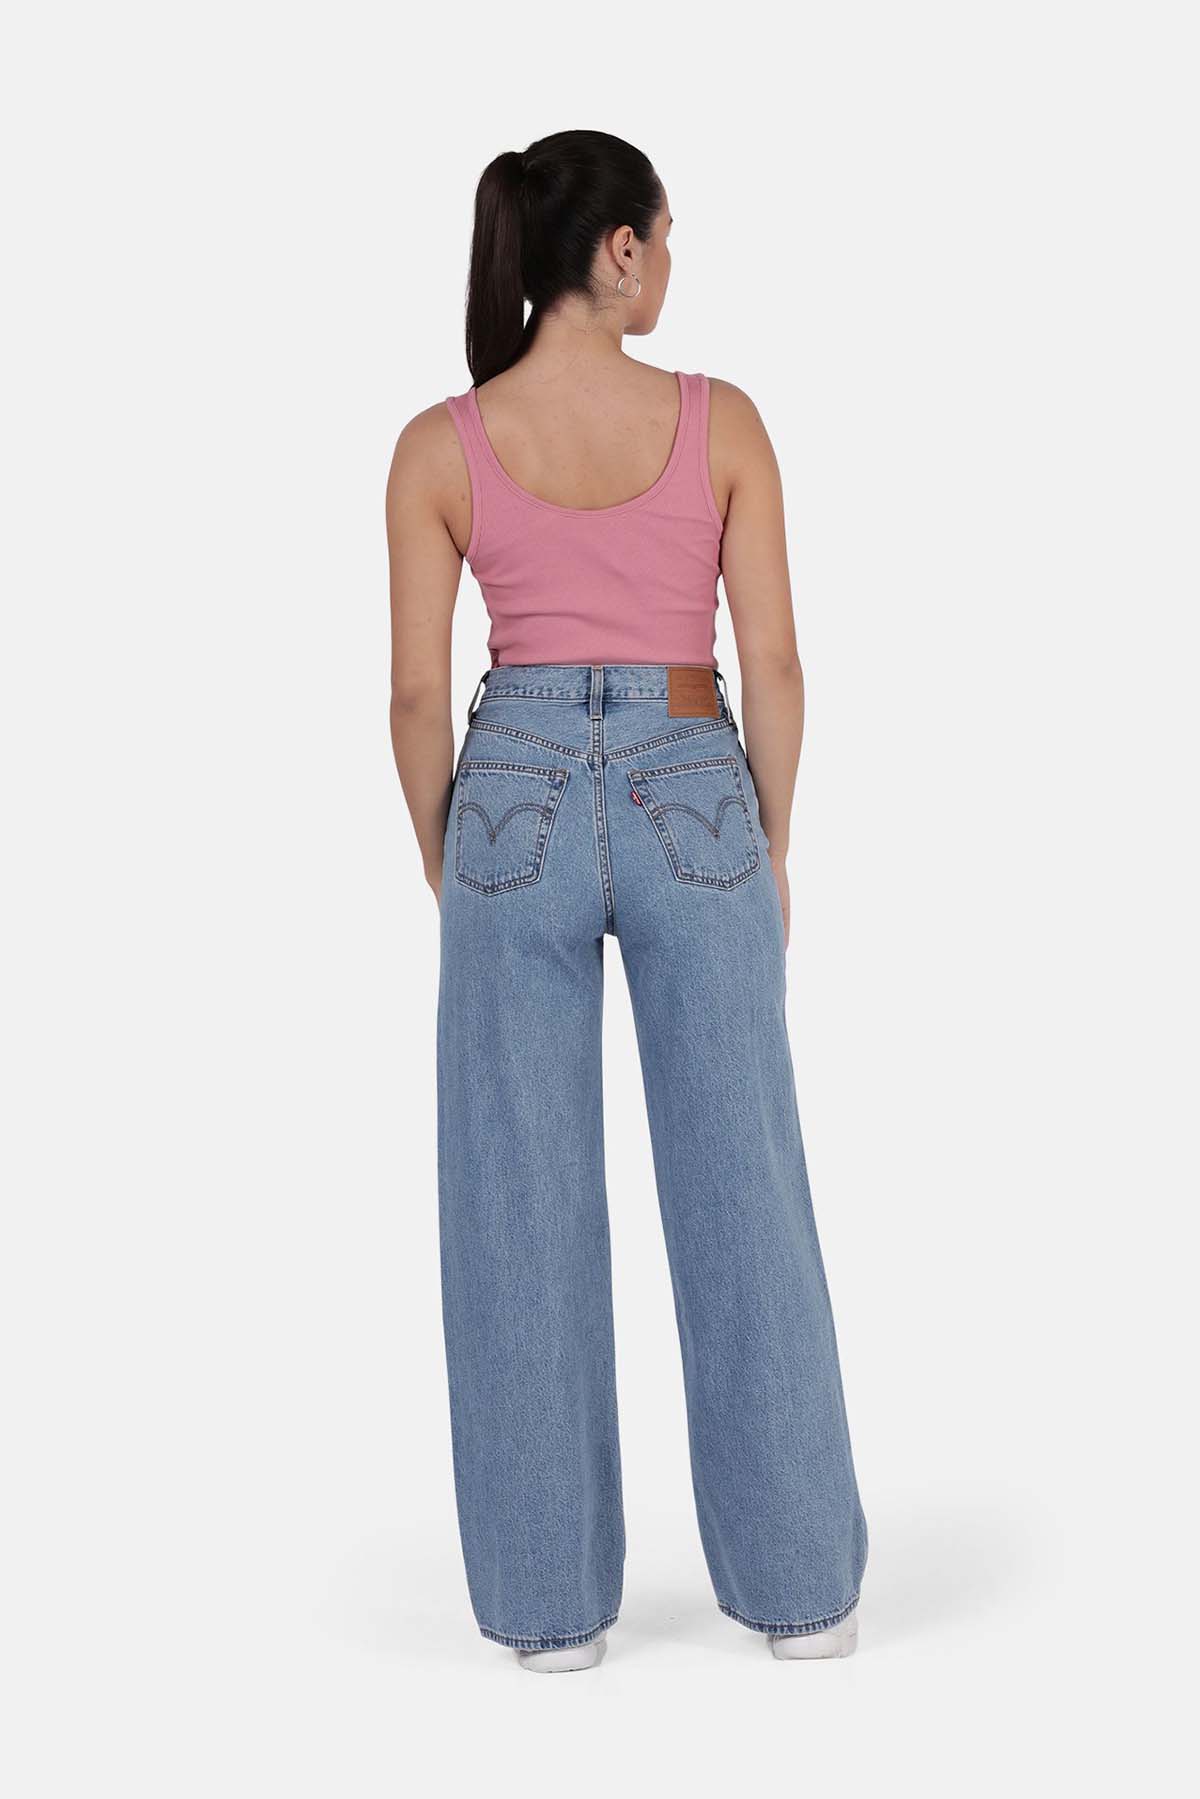 Ribcage Wide Leg Jeans - Levi's Jeans, Jackets & Clothing